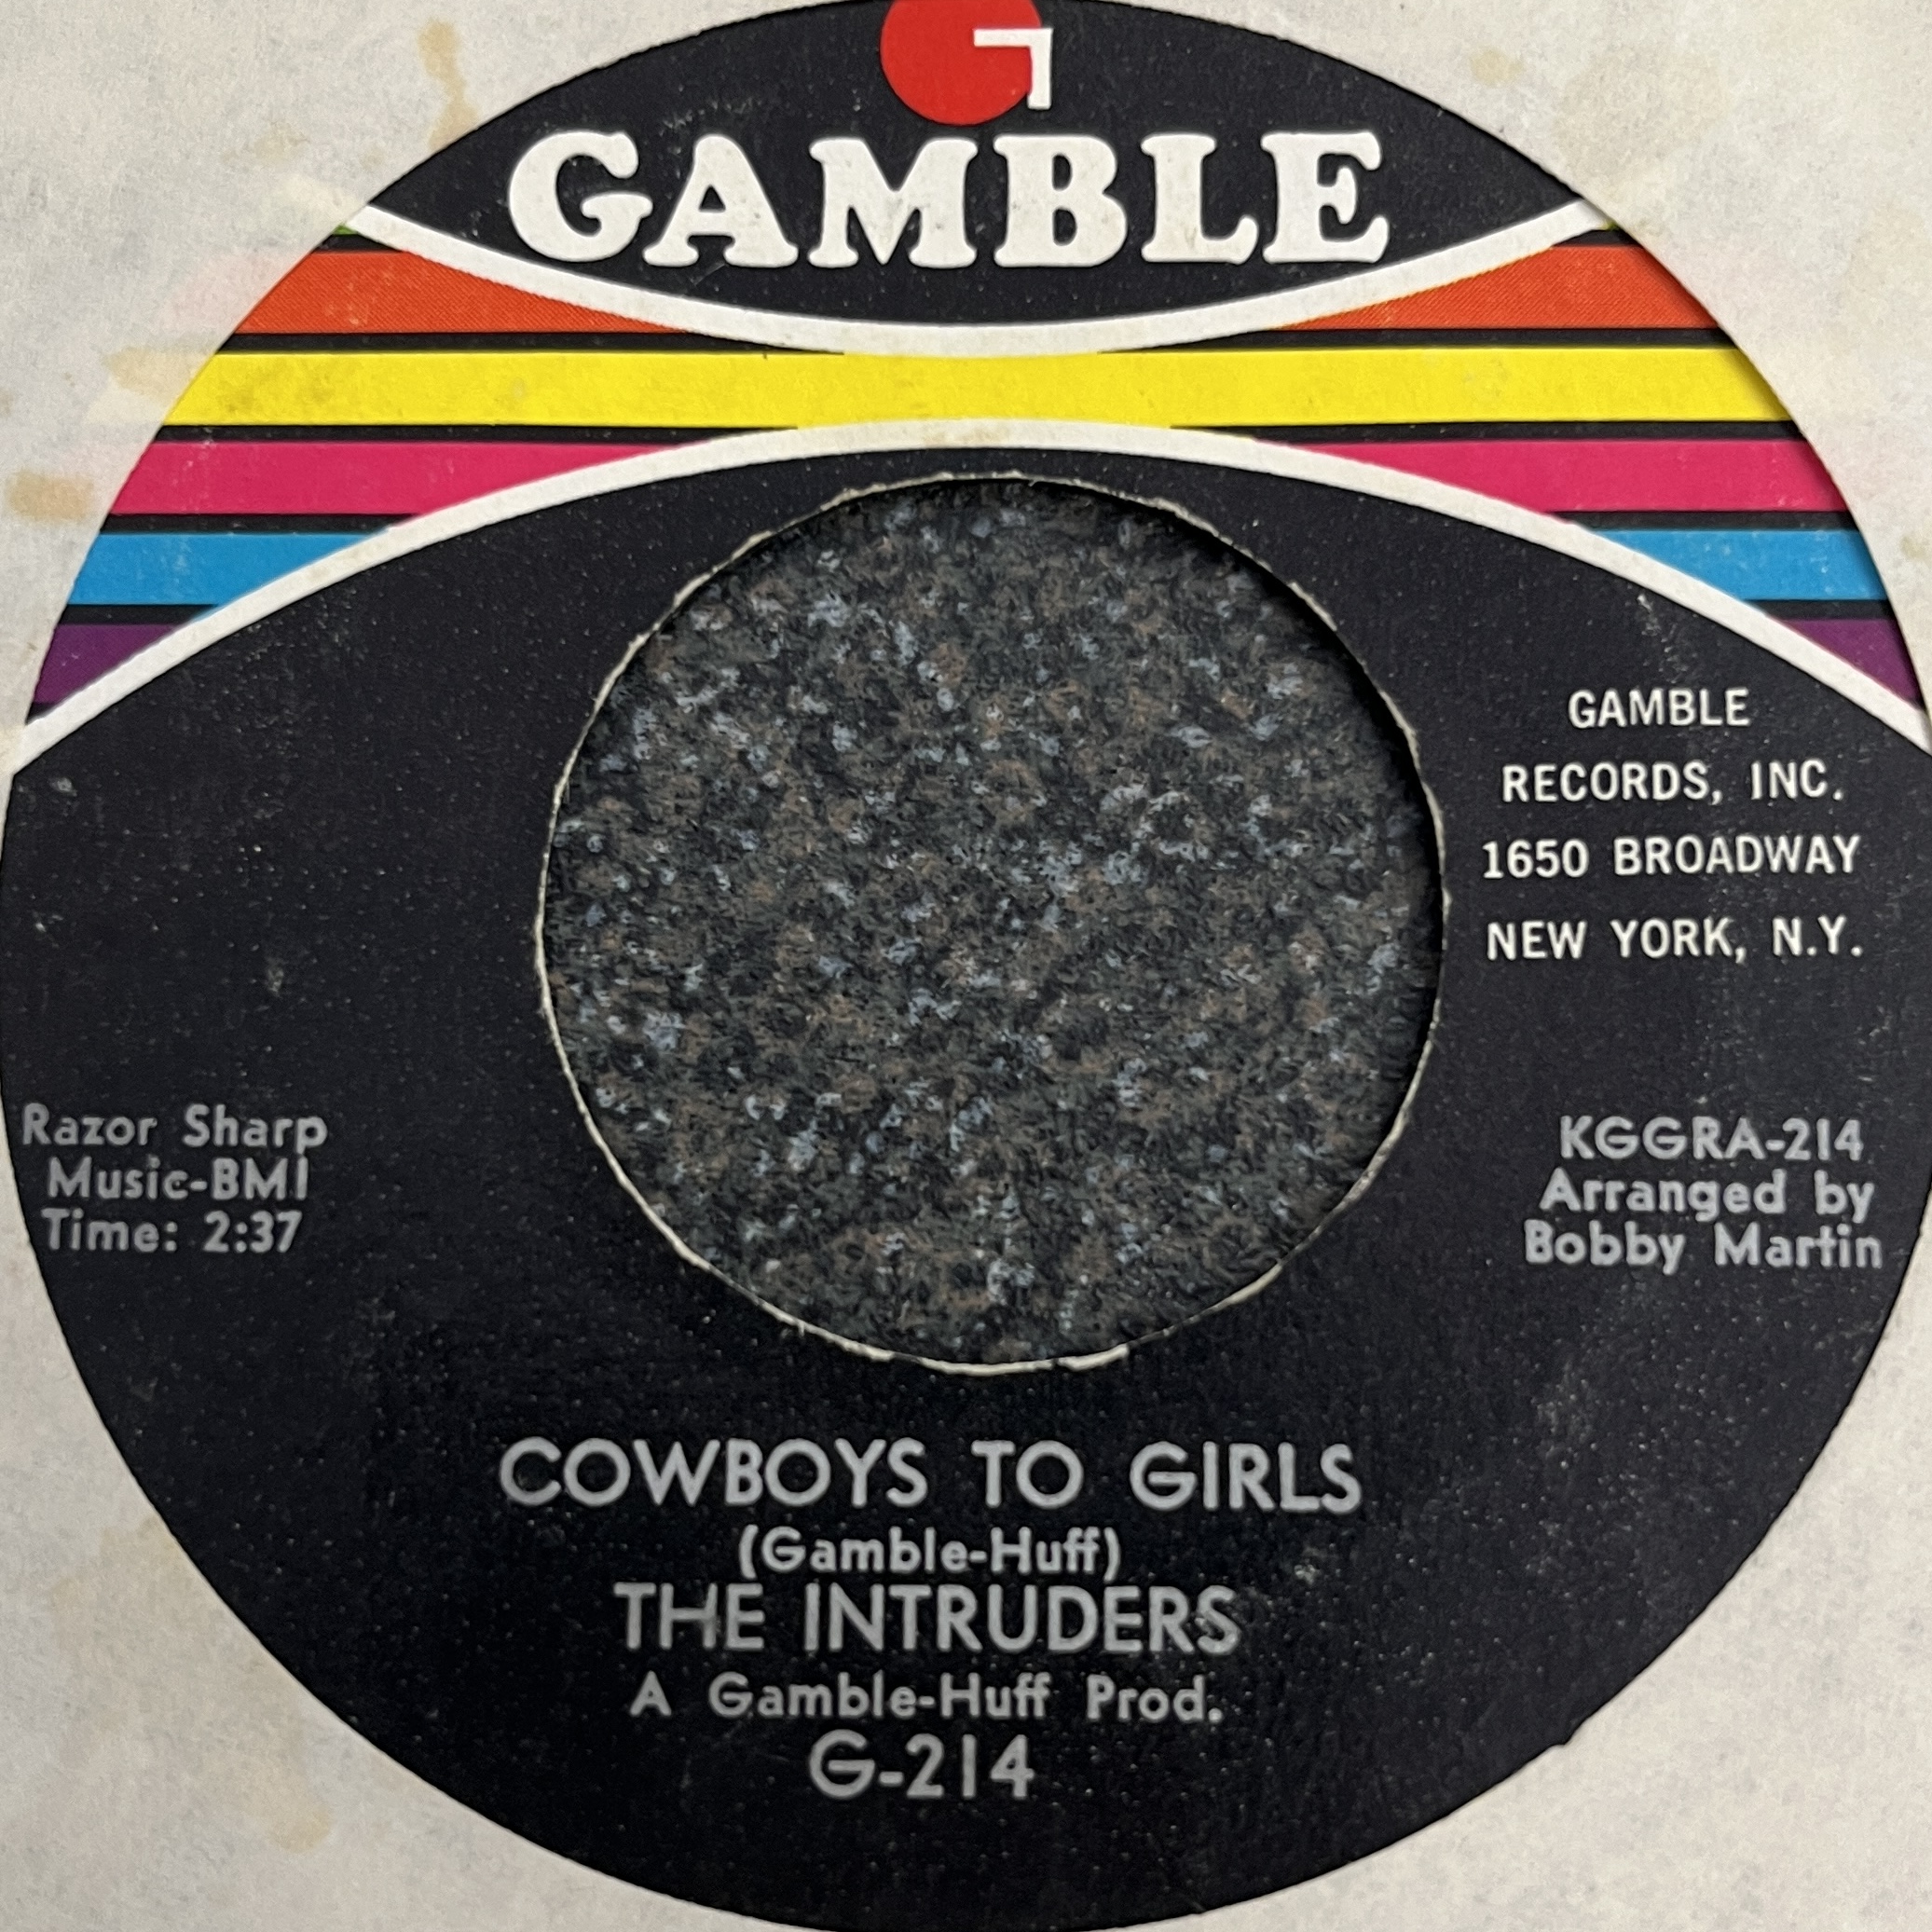 THE INTRUDERS - COWBOYS TO GIRLS